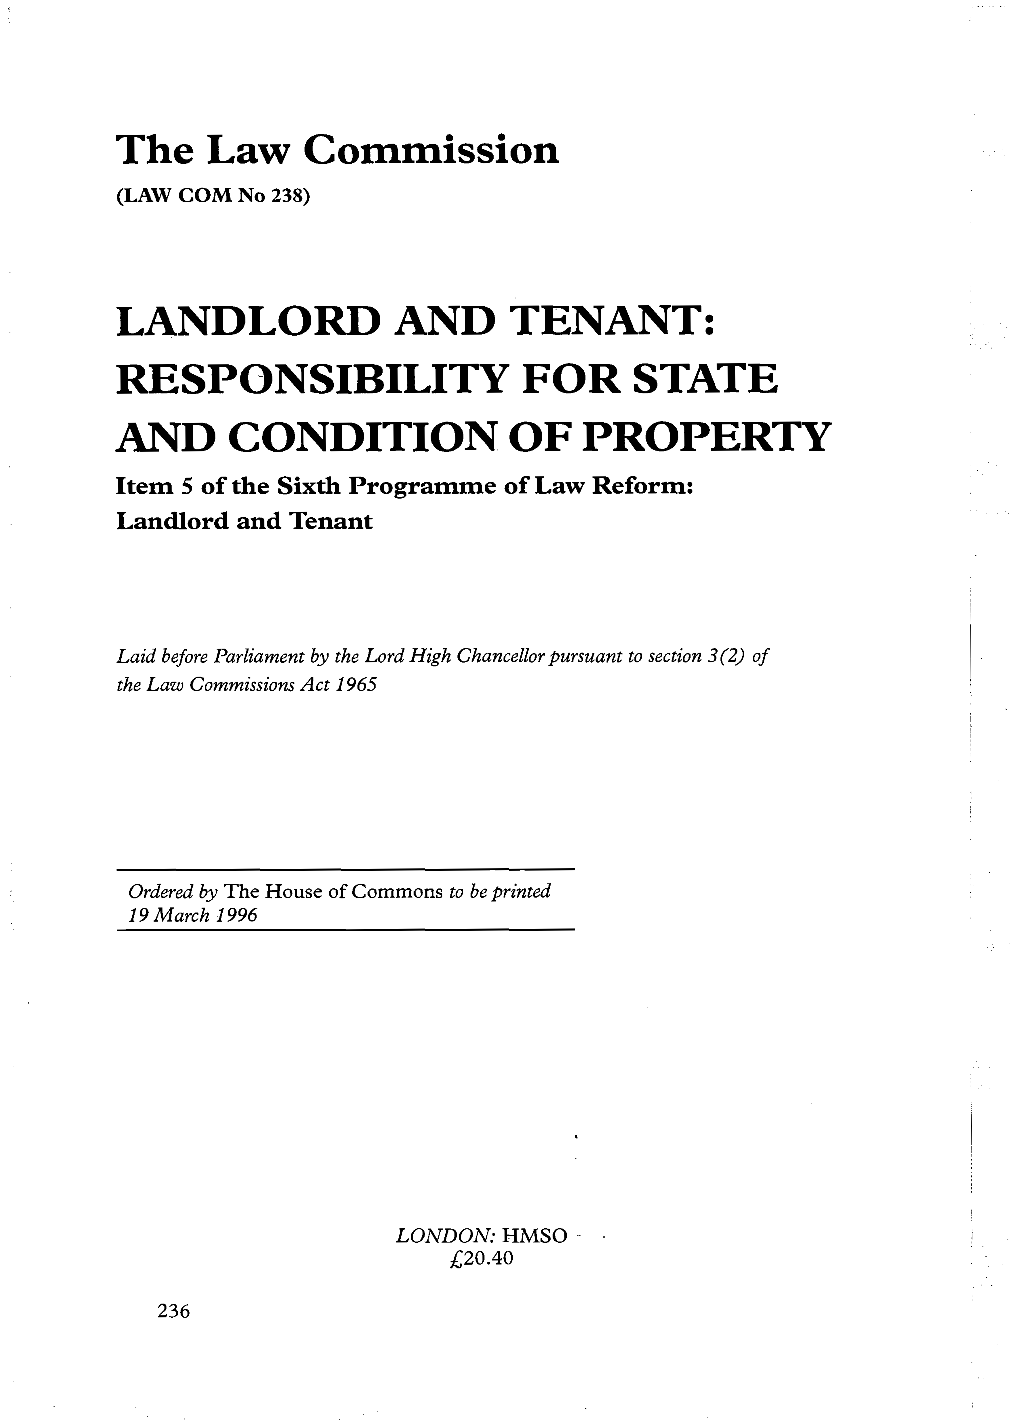 LANDLORD and TENANT: RESPONSIBILITY for STATE and CONDITION of PROPERTY Item 5 of the Sixth Programme of Law Reform: Landlord and Tenant